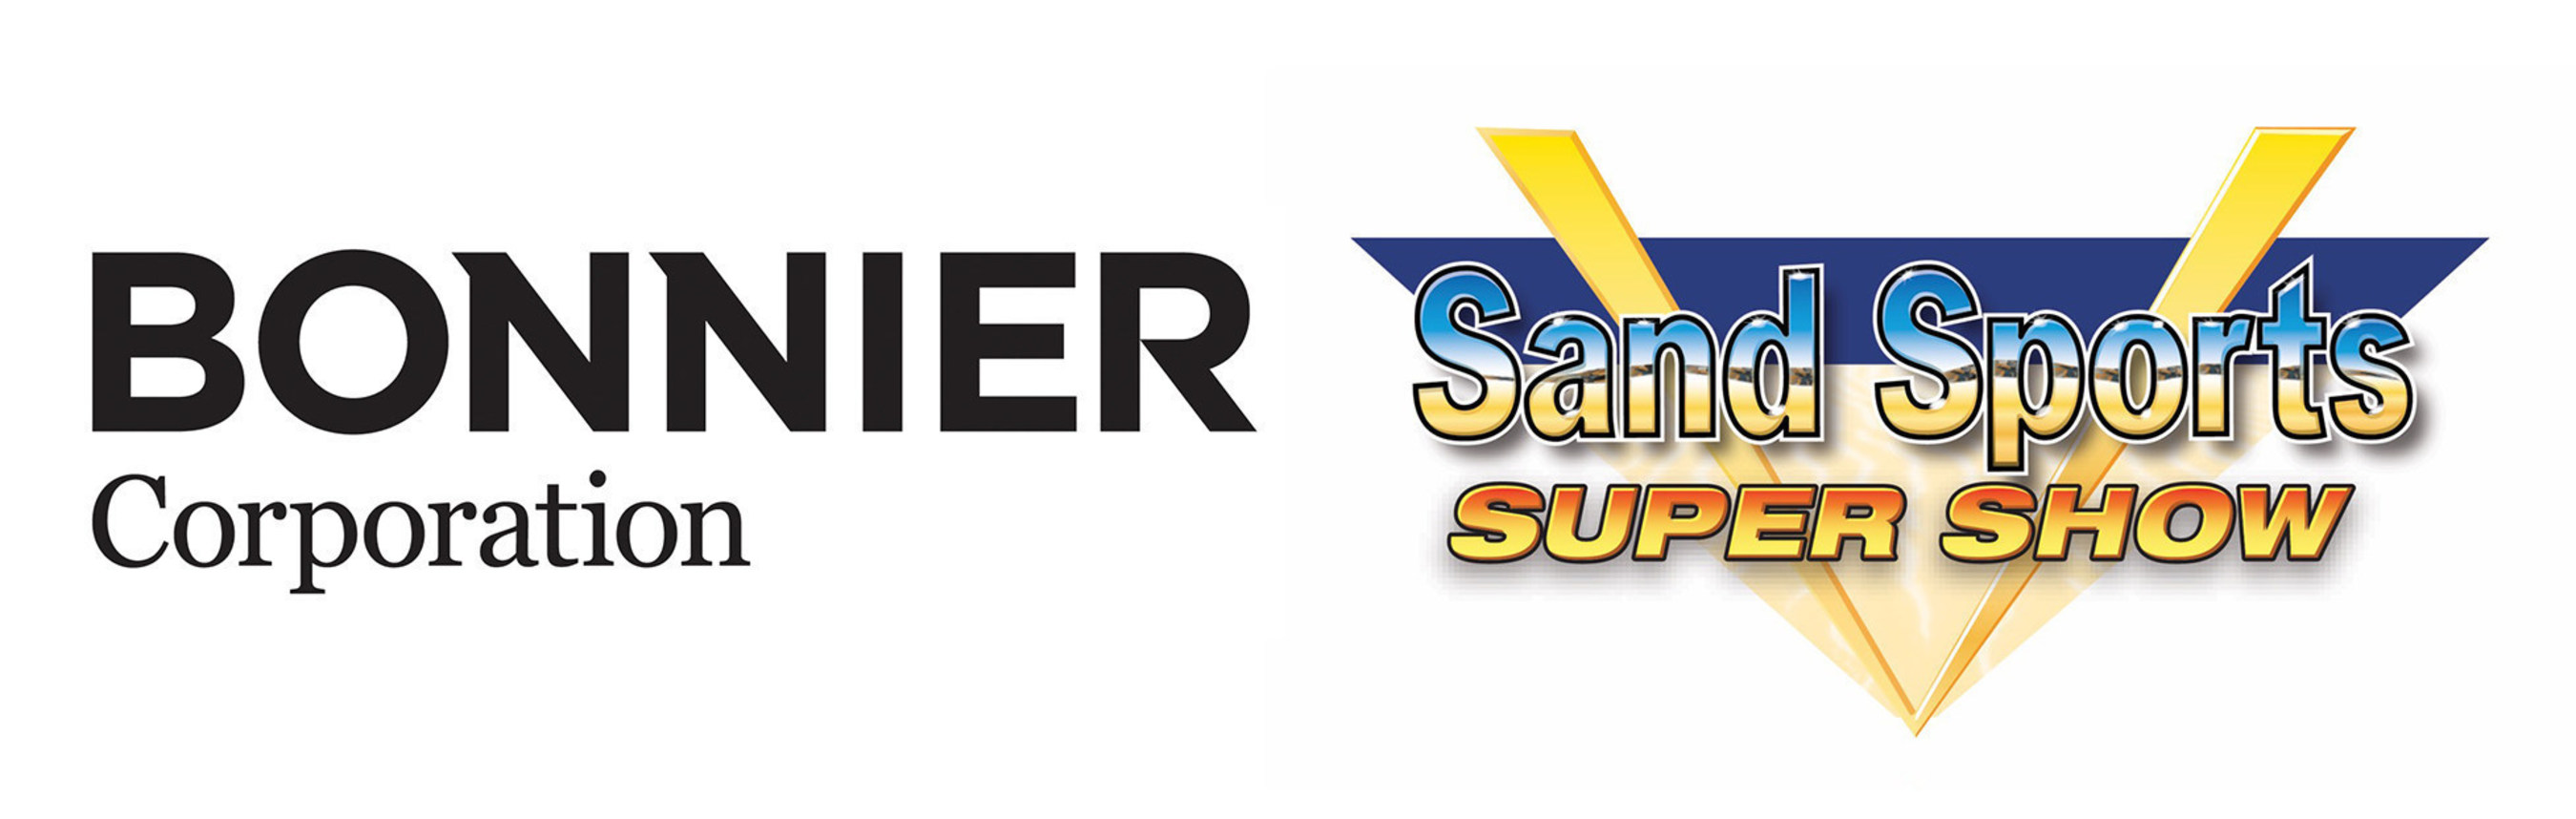 Bonnier Corporation, one of the largest special-interest publishing groups in the country, has acquired the Sand Sports Super Show, the world's premier sand sports trade show and consumer expo.